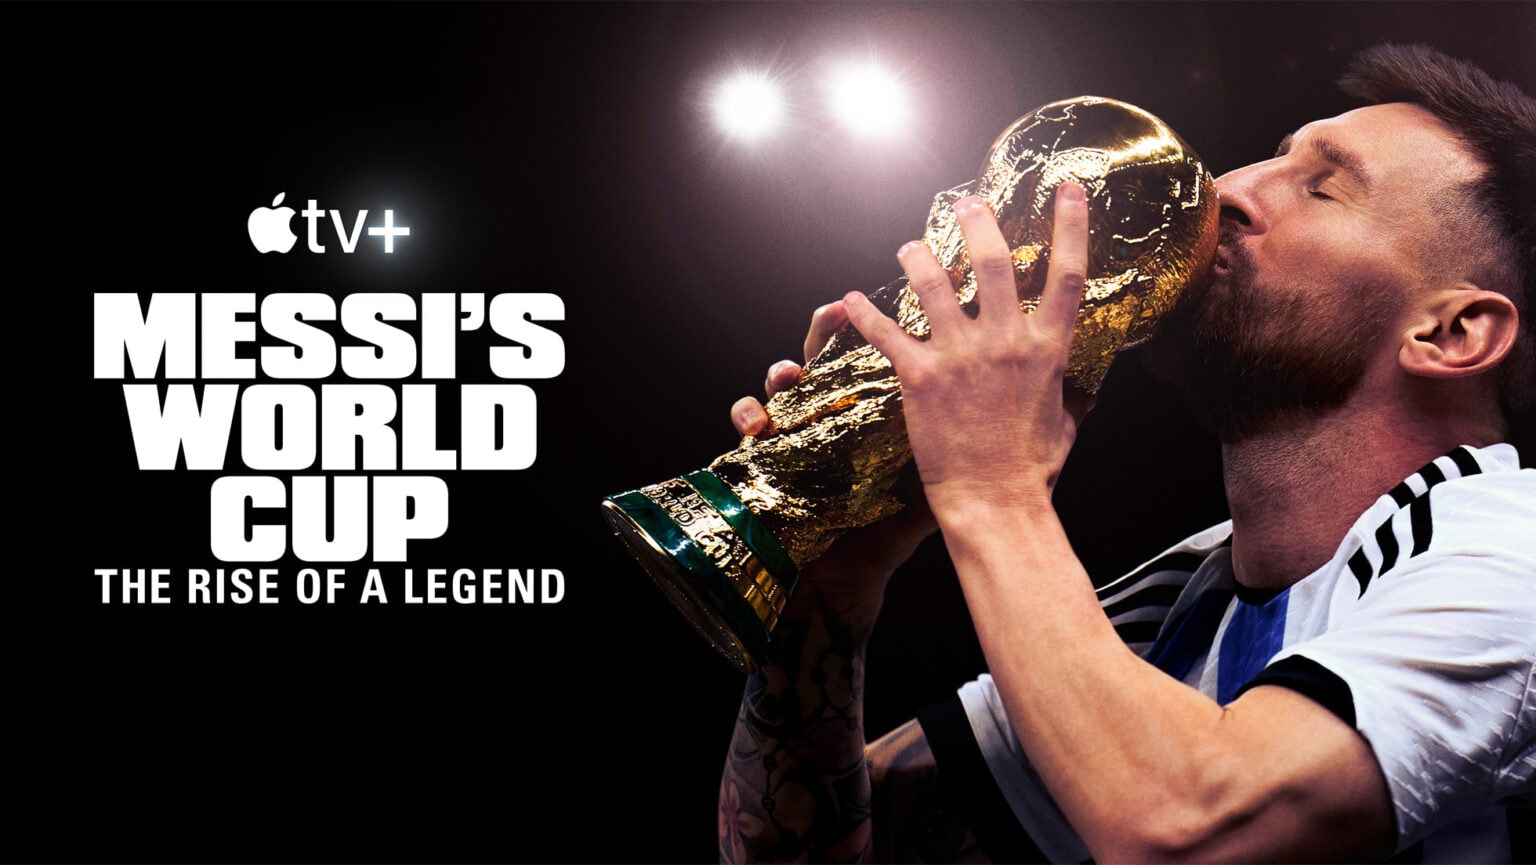 Messi's World Cup documentary series